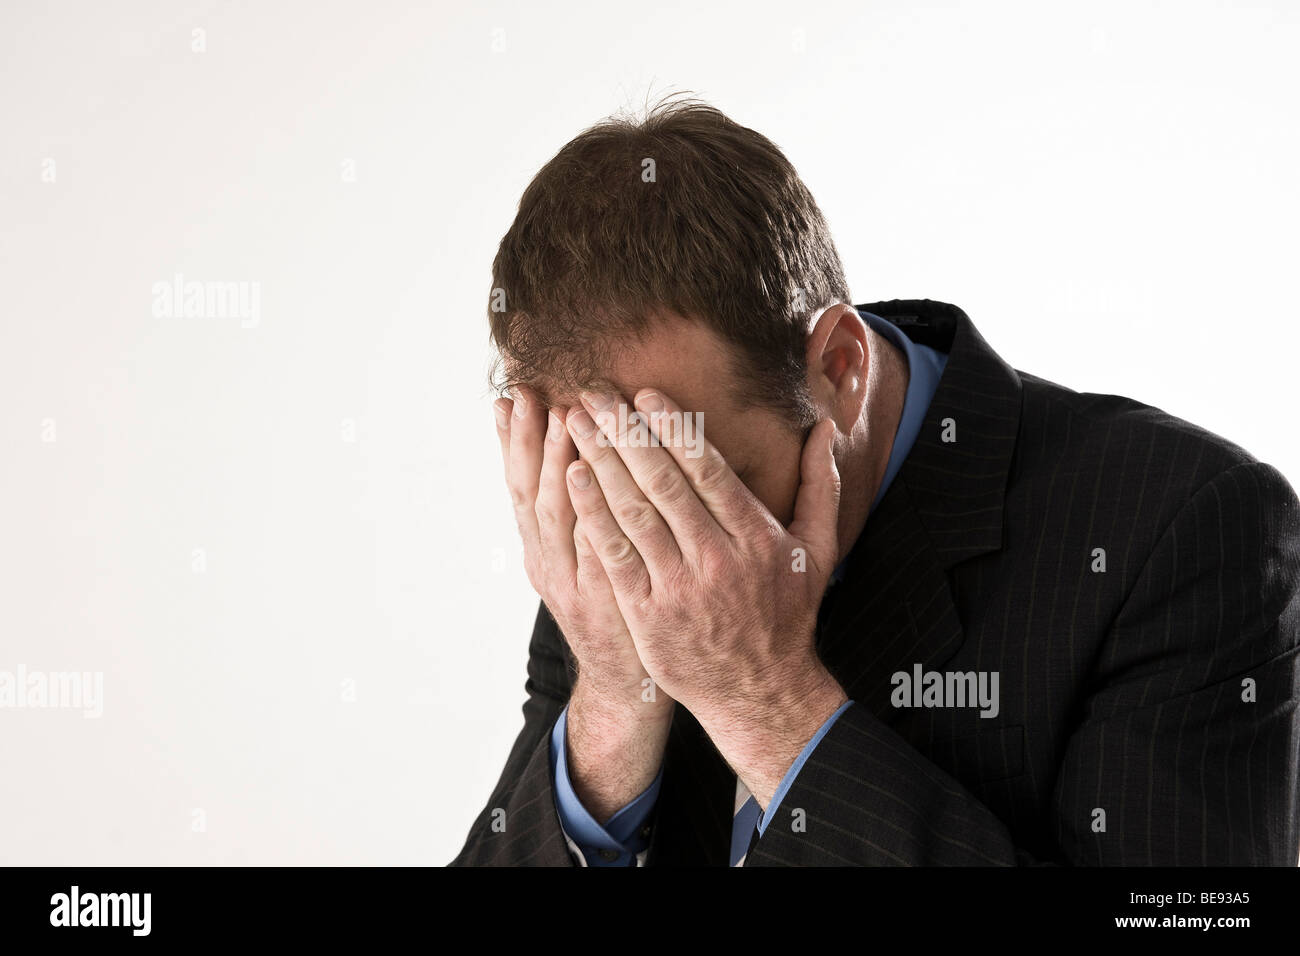 Man wearing a suit, hands covering his face Stock Photo